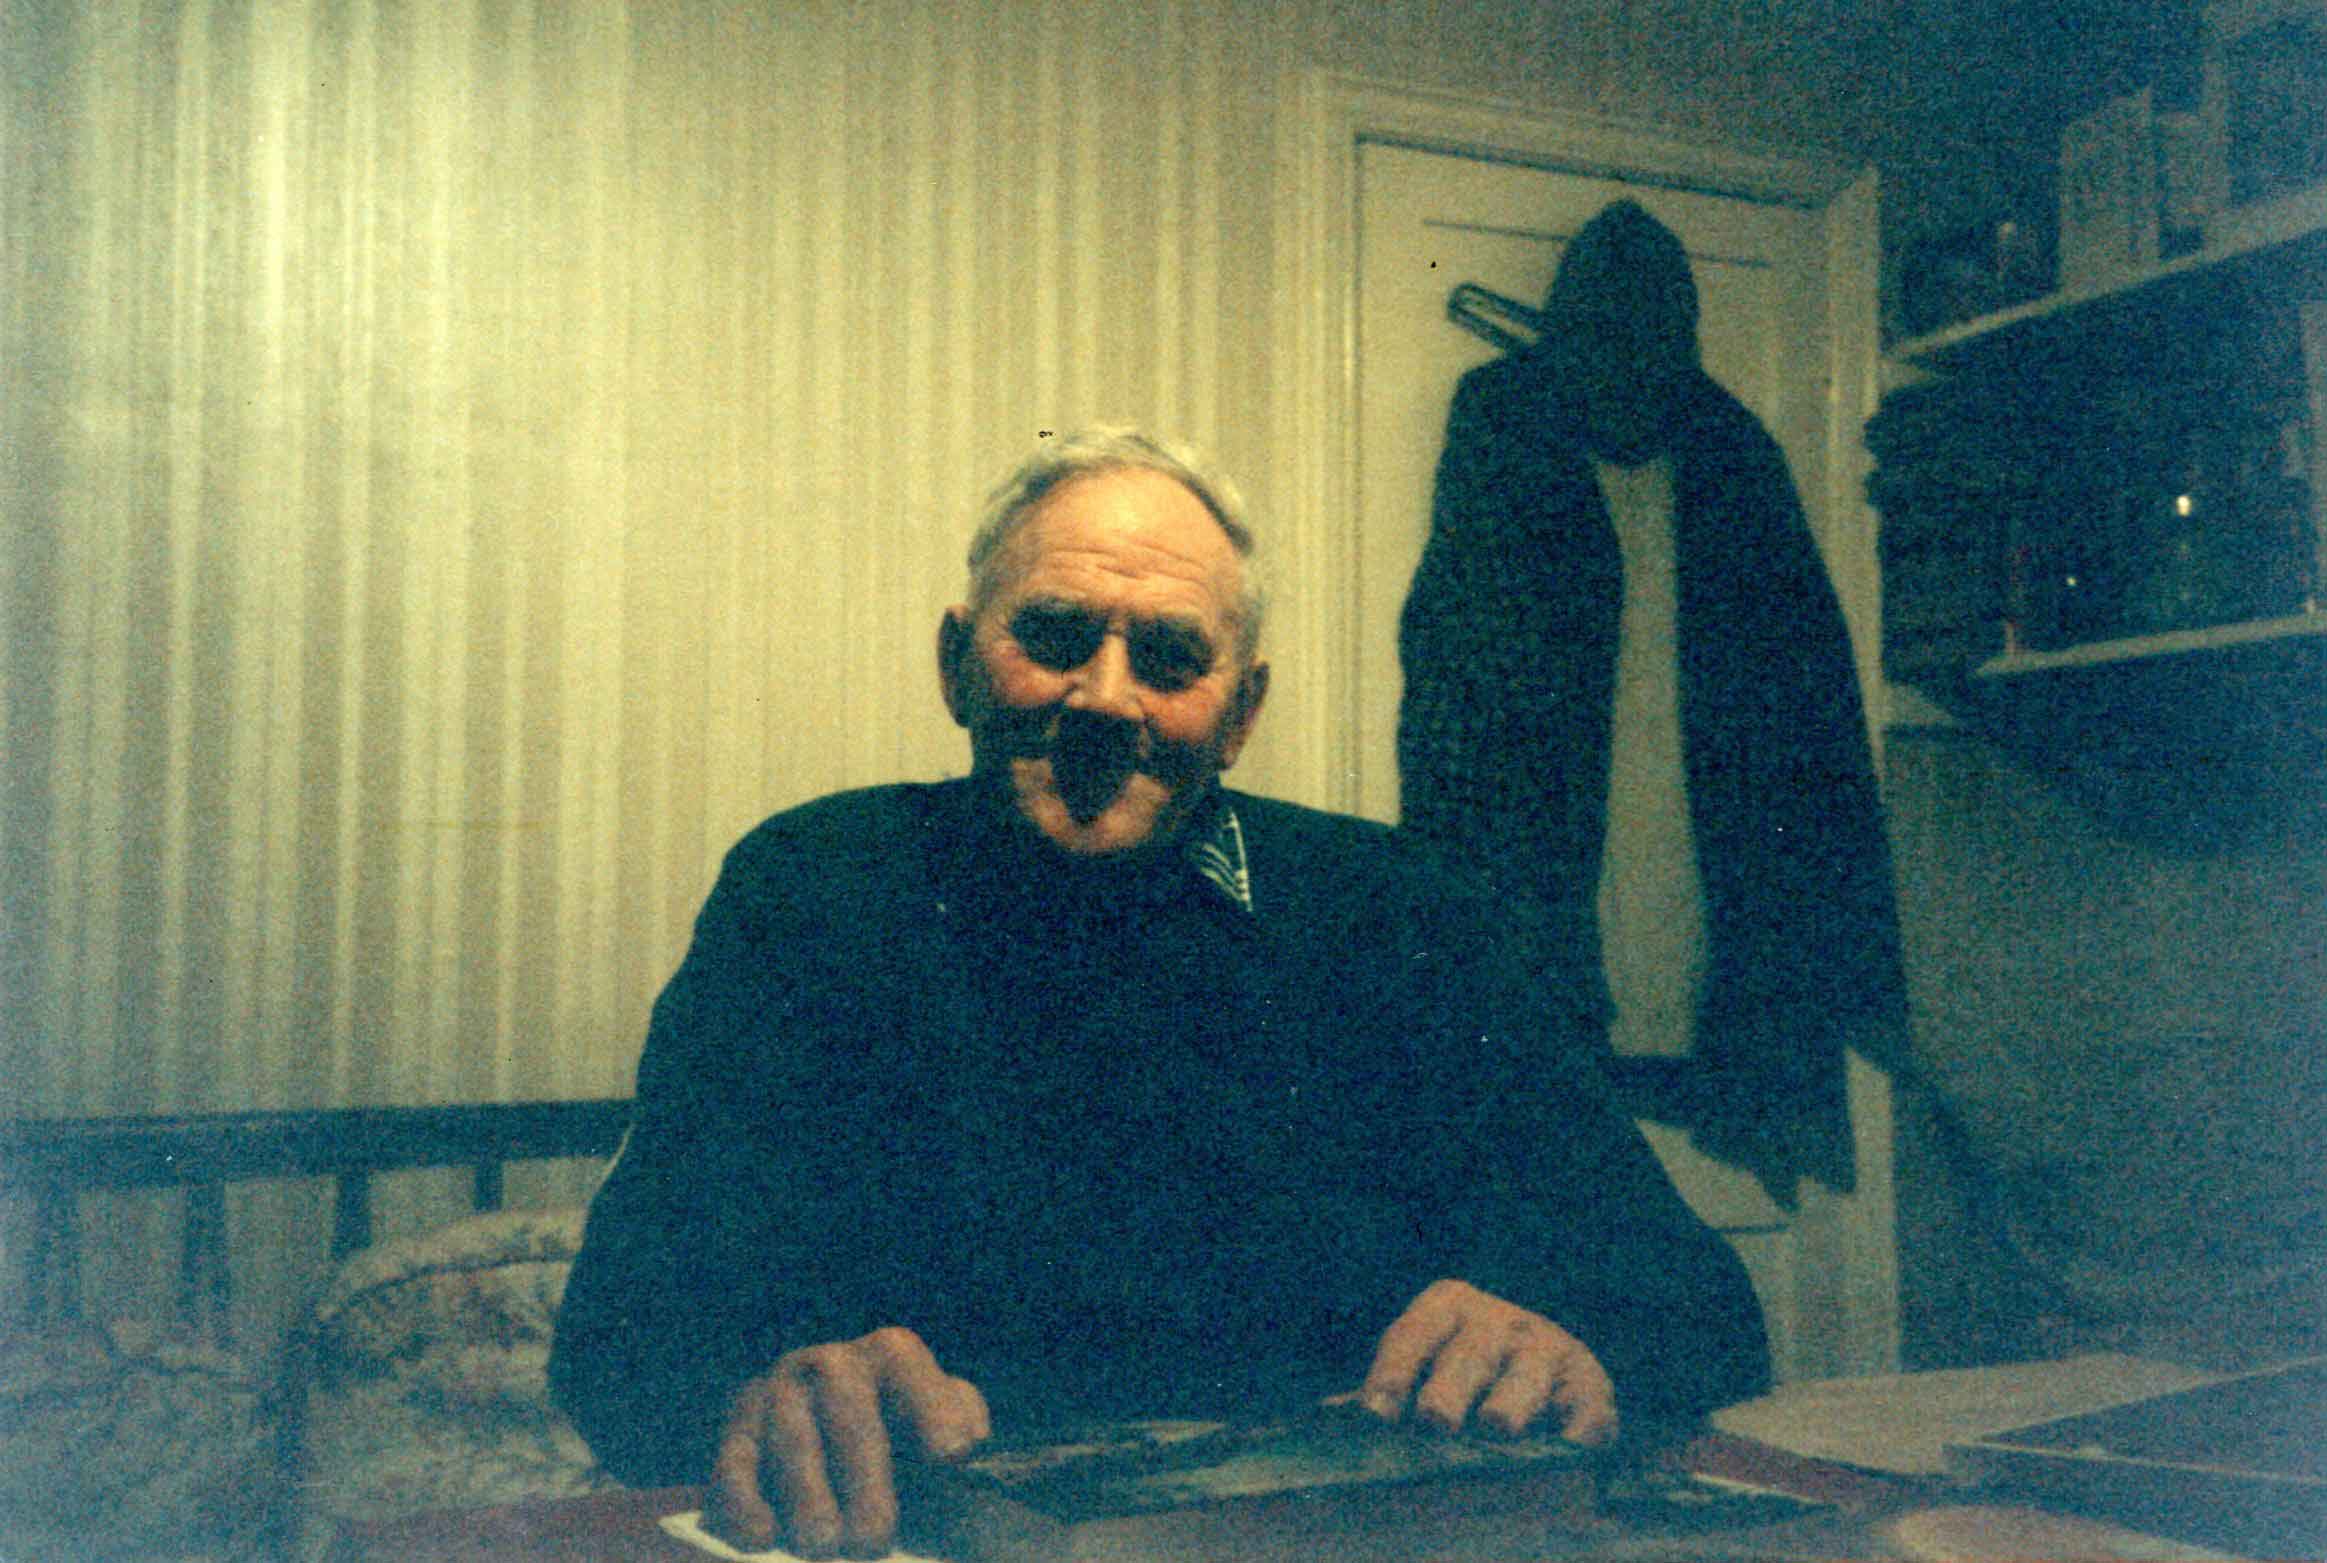 Mr Sidney Hammond in 1998, whose great grandmother worked at Elveden Hall and claimed to be a descendant of the Maharajah